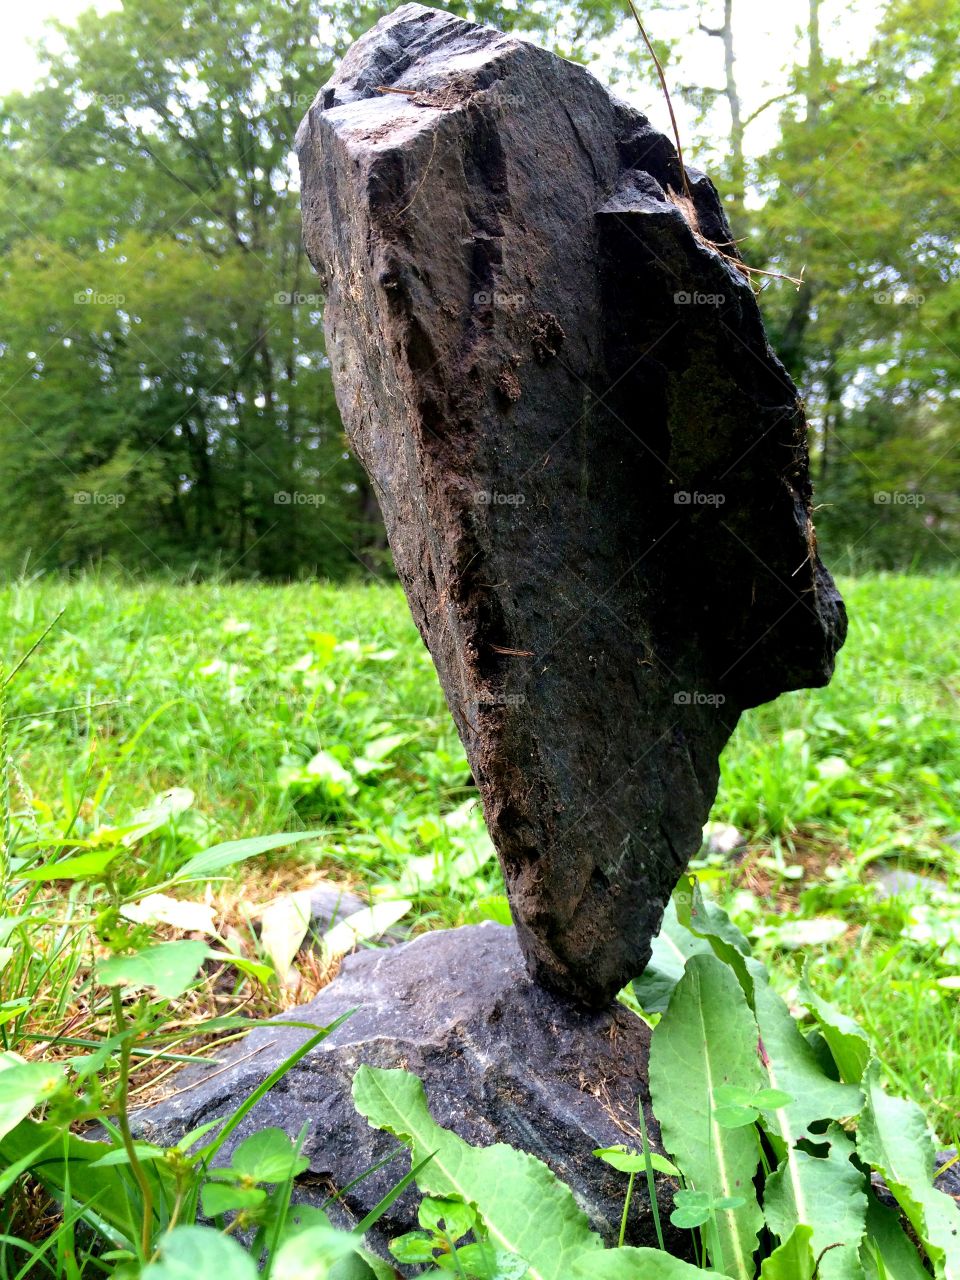 Balance. How is this stone even balanced? Found in a park.